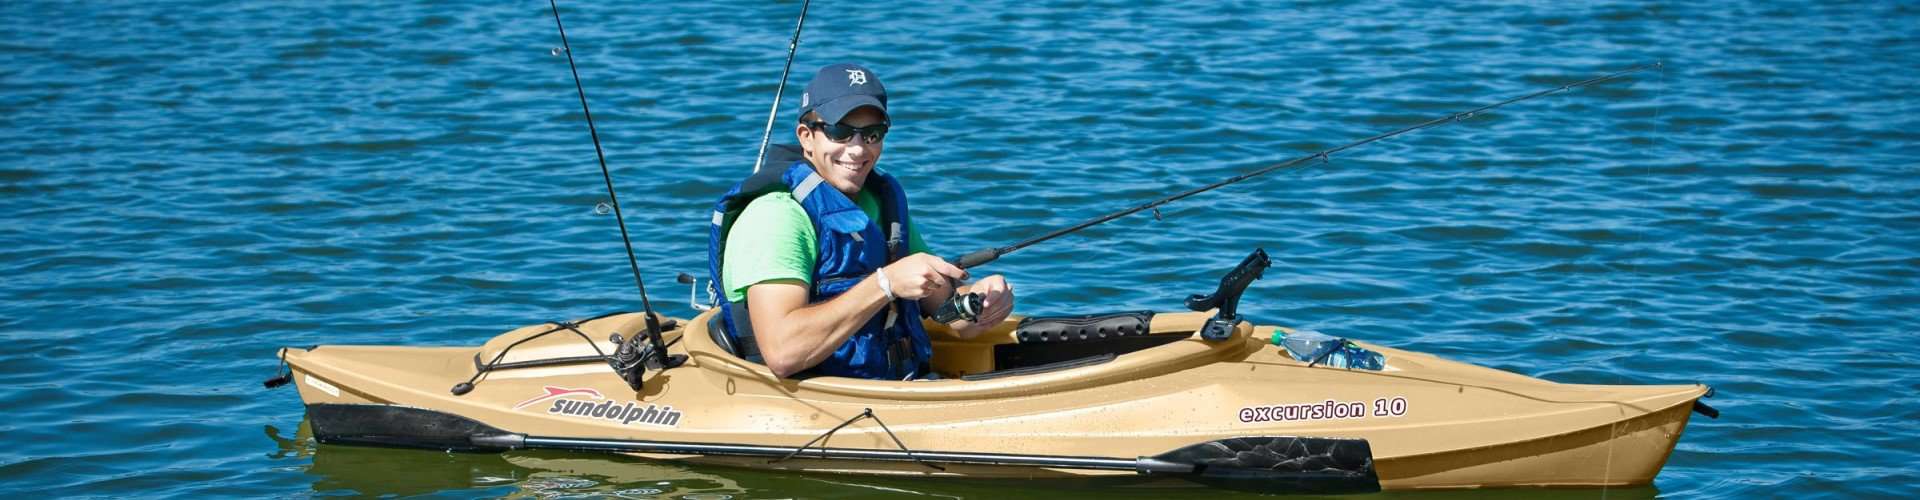 The 5 Best Fishing Kayaks Under 500 in 2020 By Experts